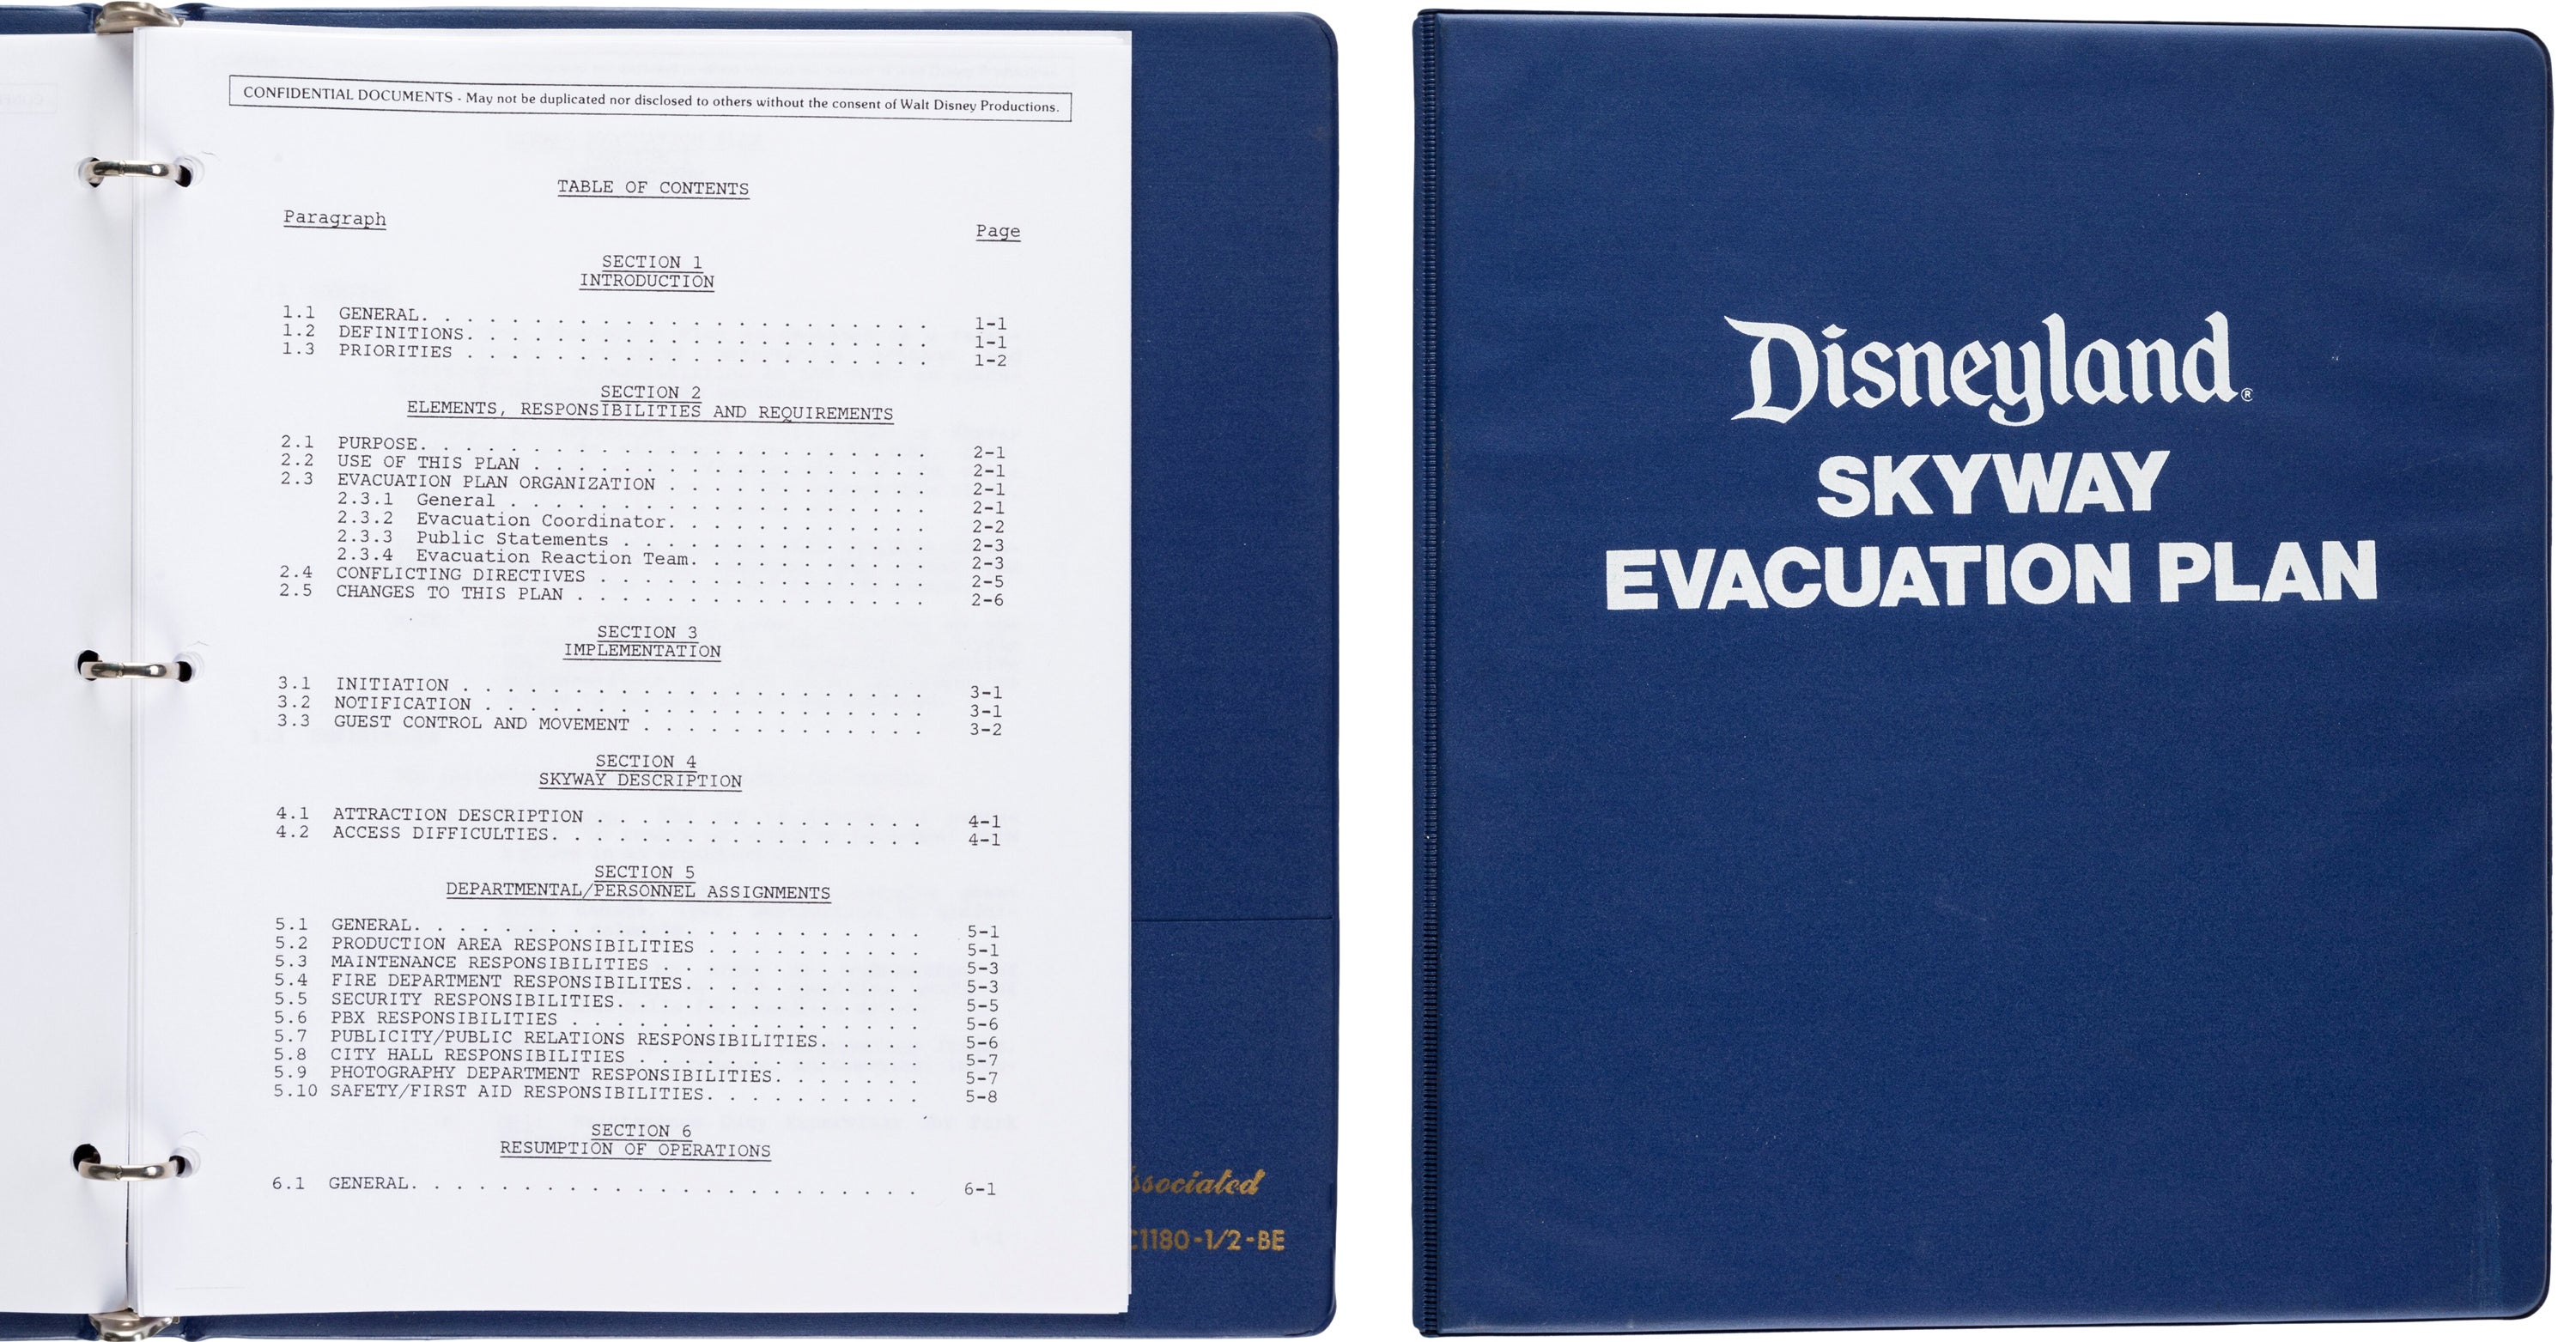 15 Amazing Pieces of Park Memorabilia From an Upcoming Disneyland Auction